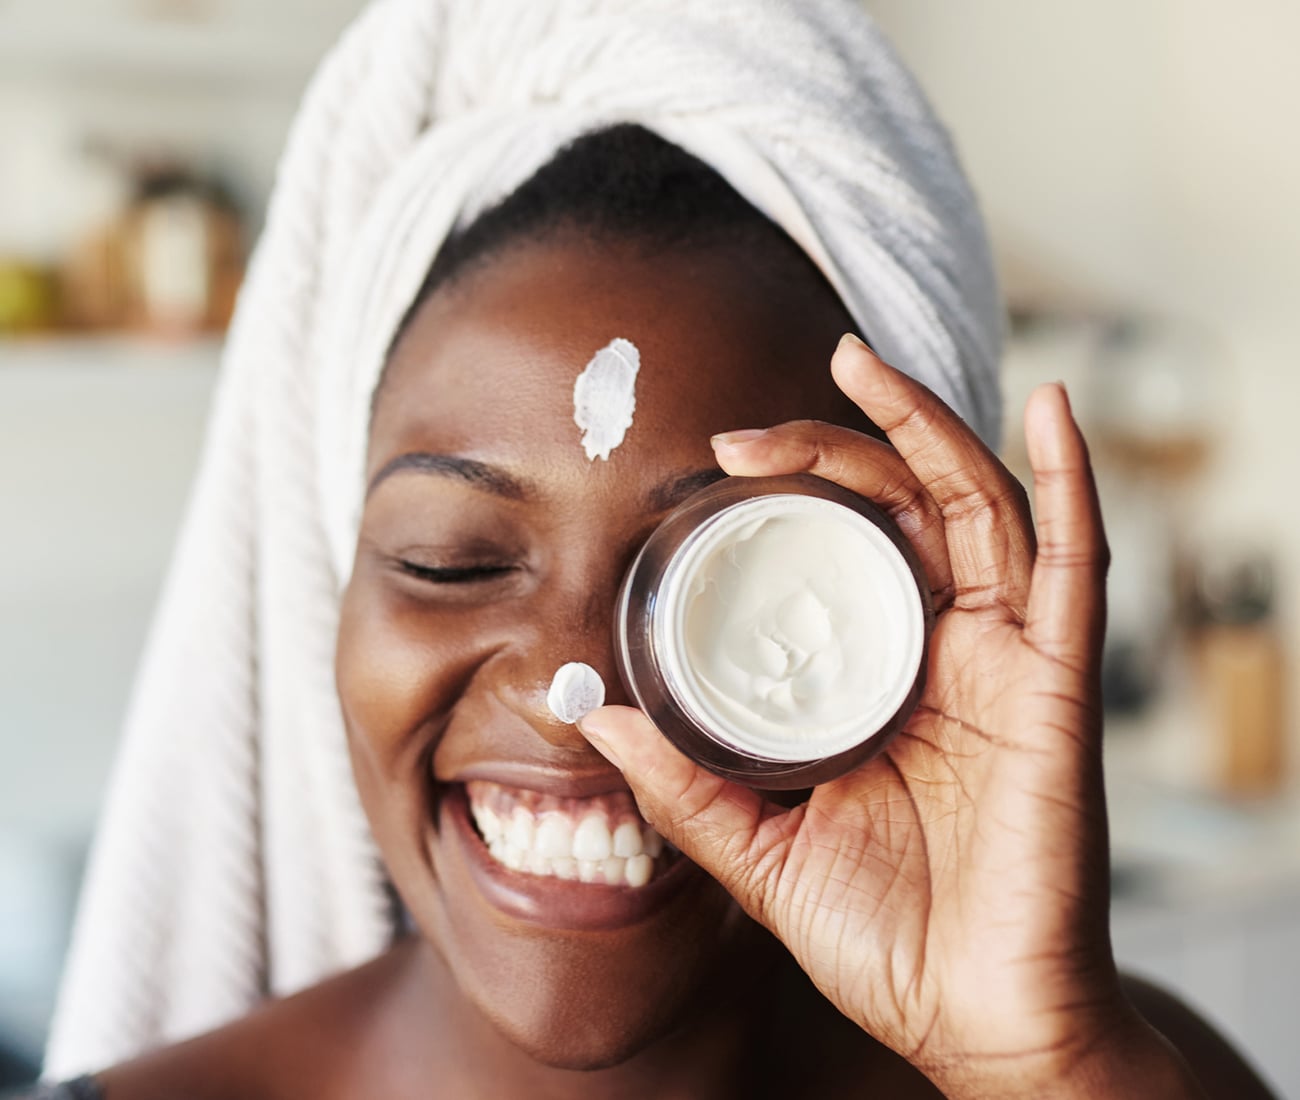 Woman With A Towel On Her Head, Holding Up A Cream In A Round Container, With Spots Of The Cream On Her Nose And Forehead, Smiling